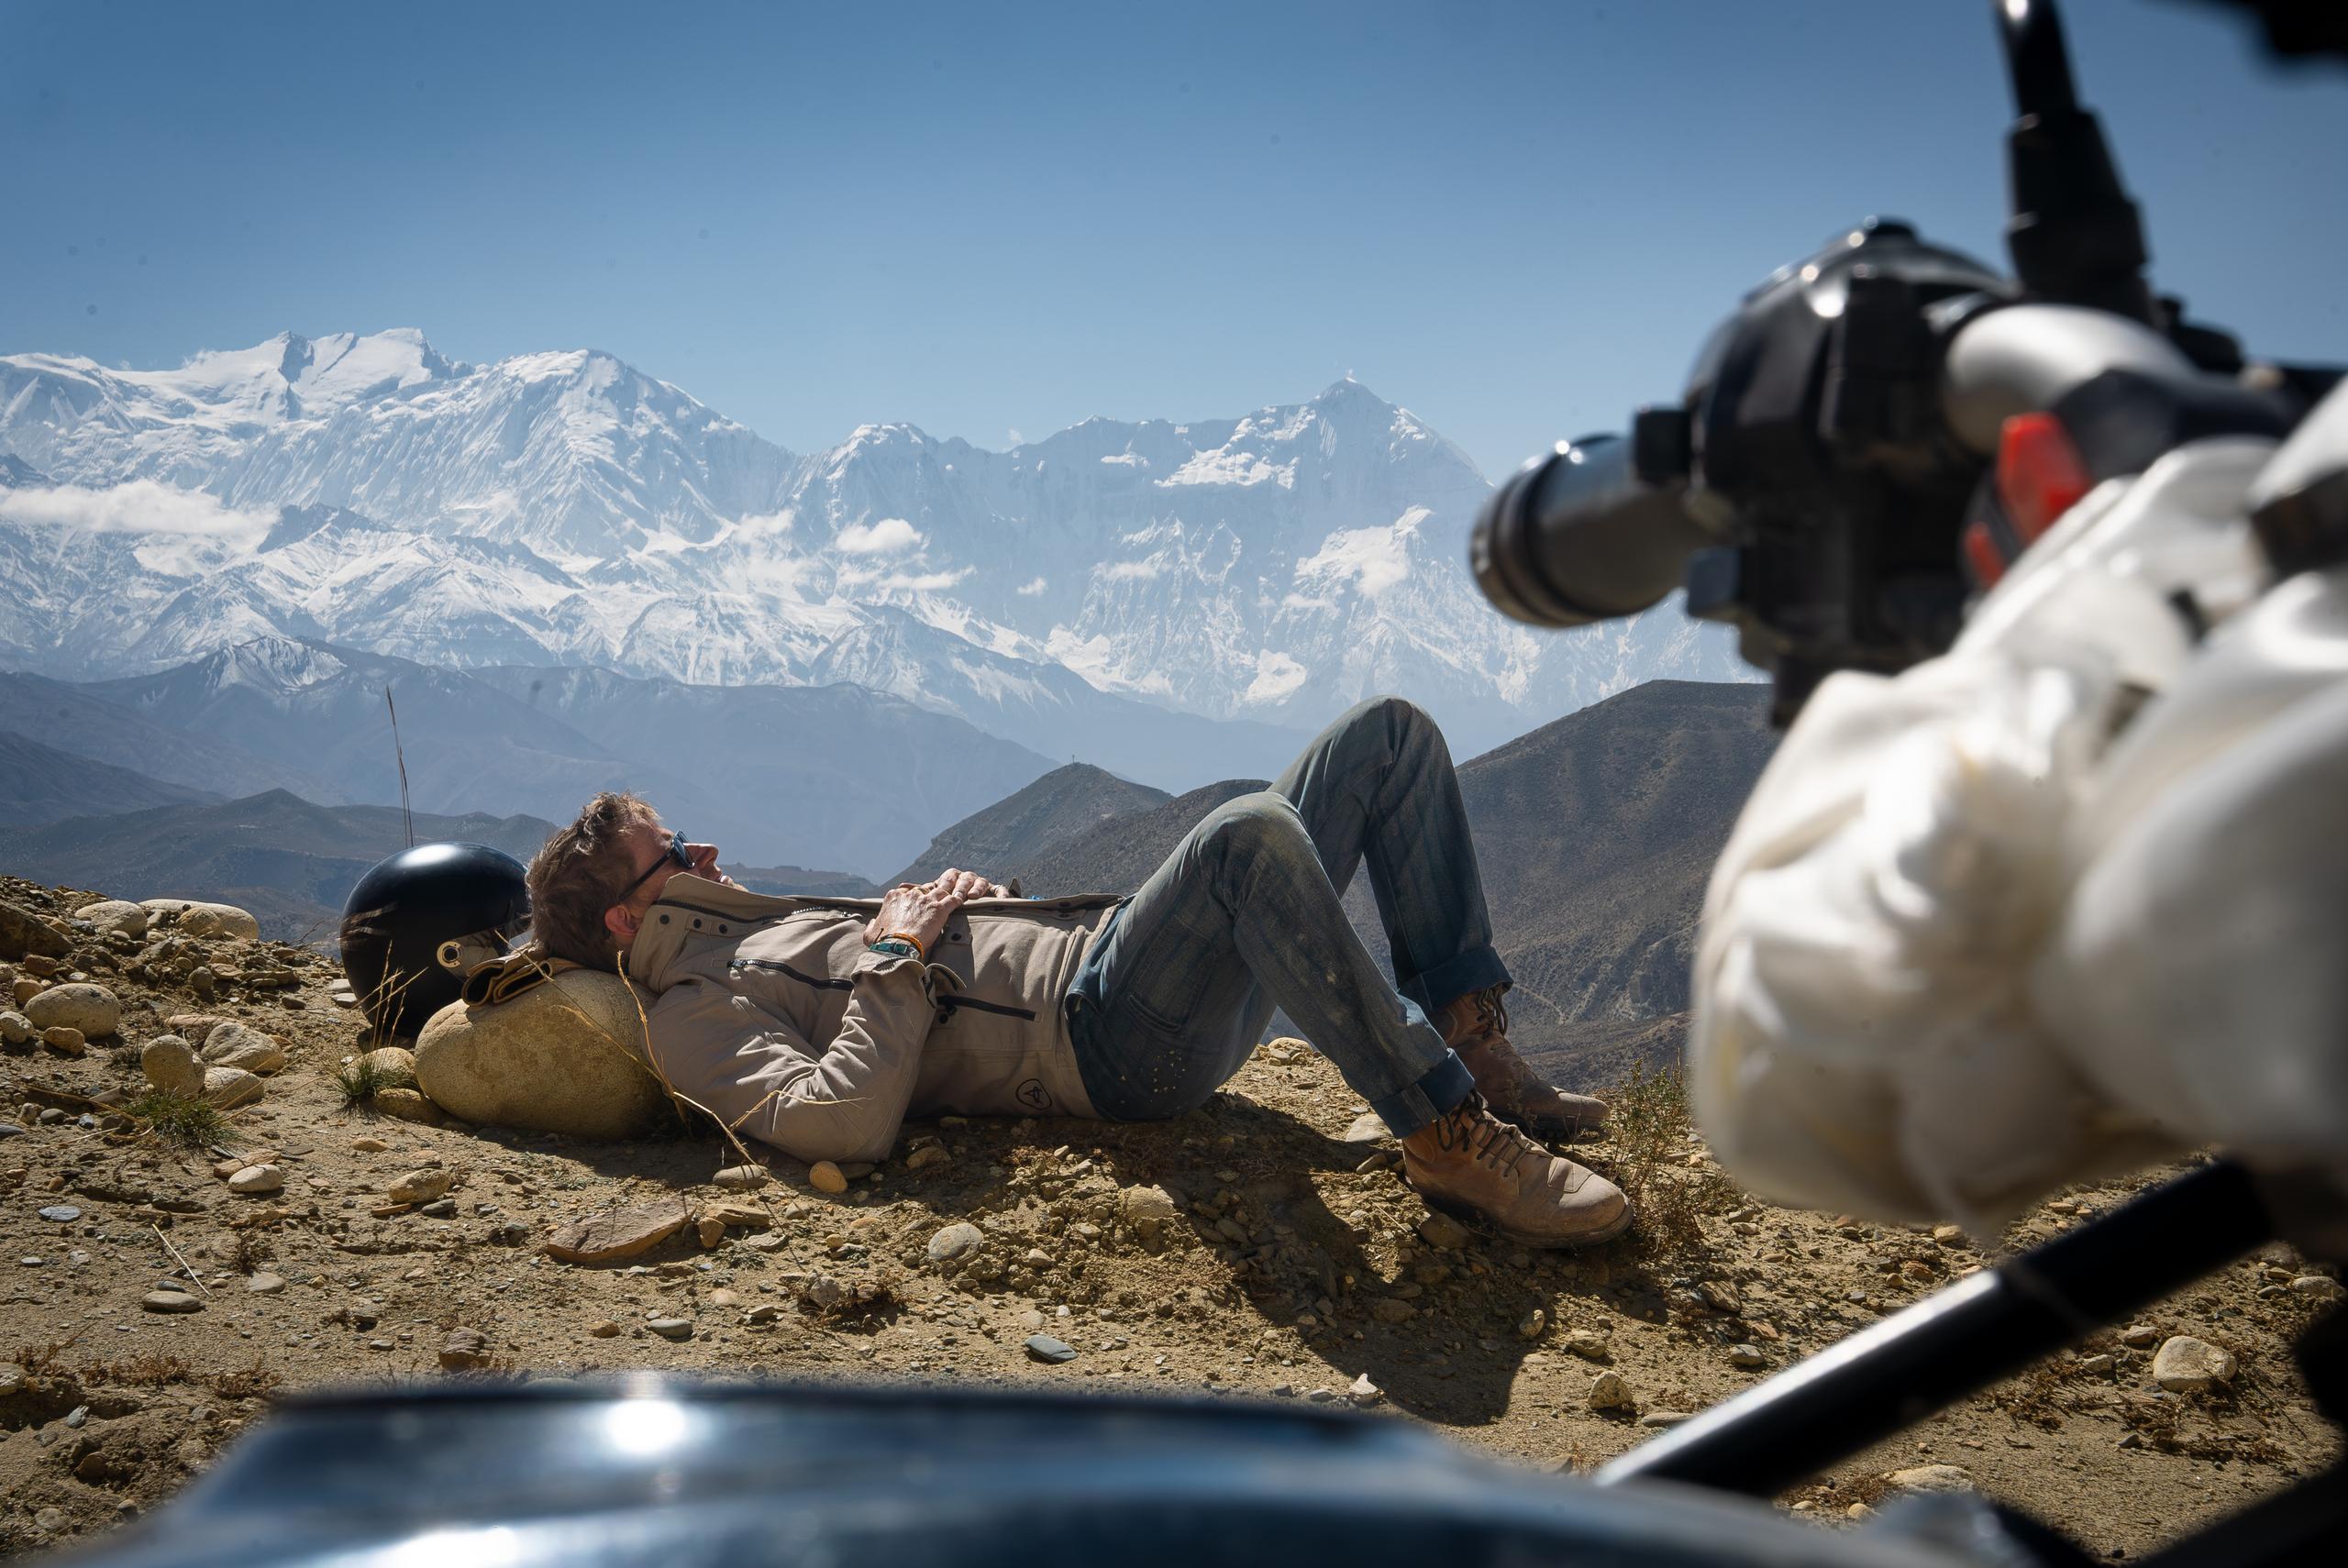 Motorcyclist laying down on rocks with snowy Himalayan mountains in the background